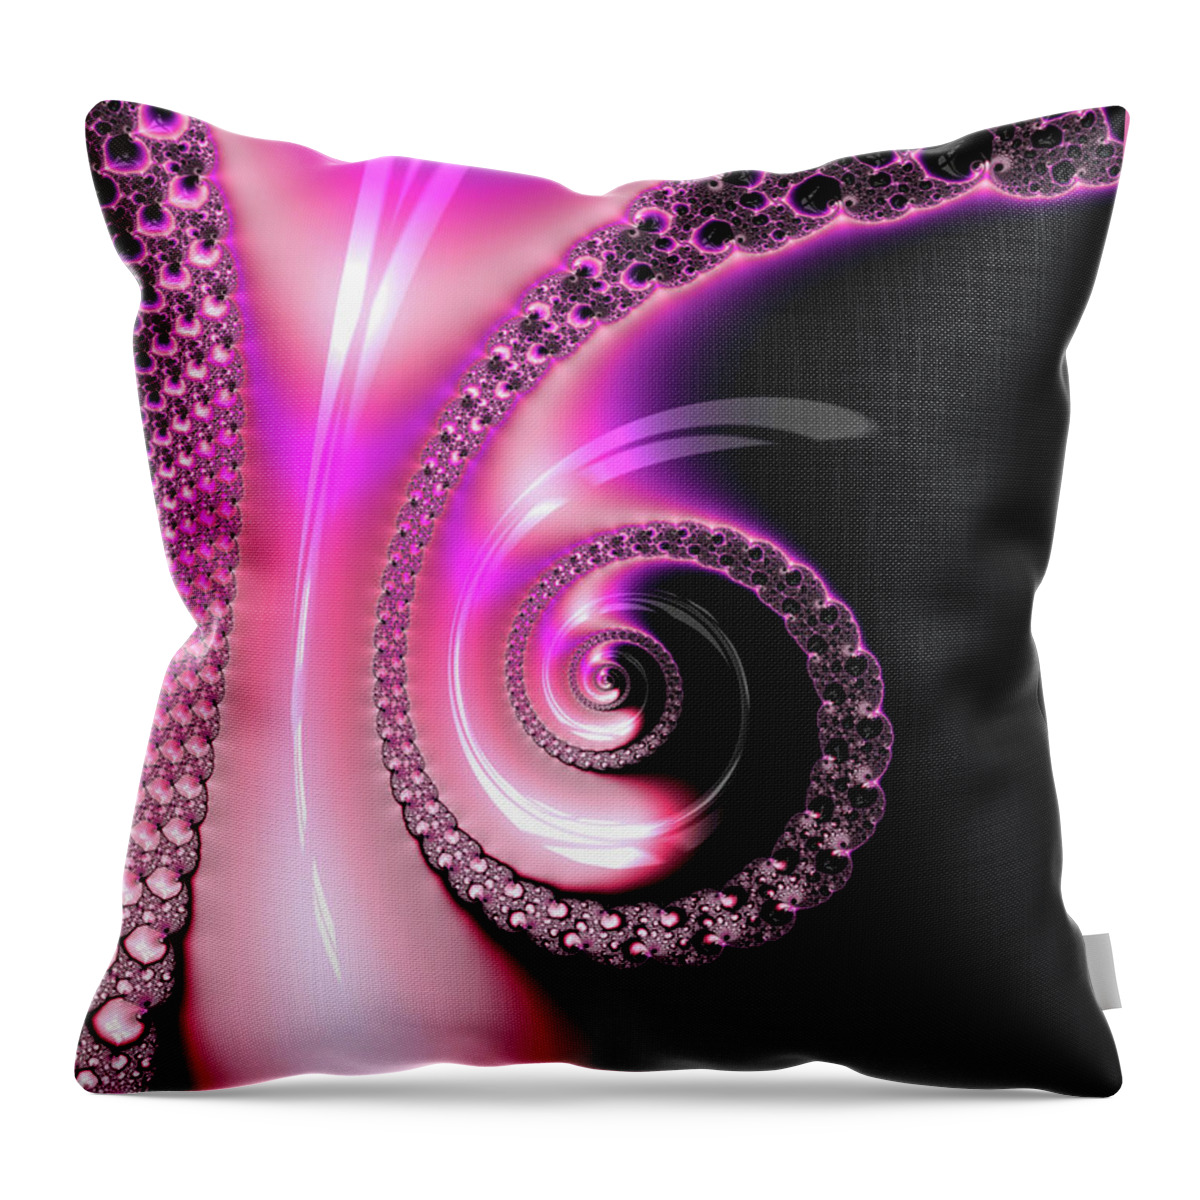 Spiral Throw Pillow featuring the photograph Fractal Spiral pink purple and black by Matthias Hauser